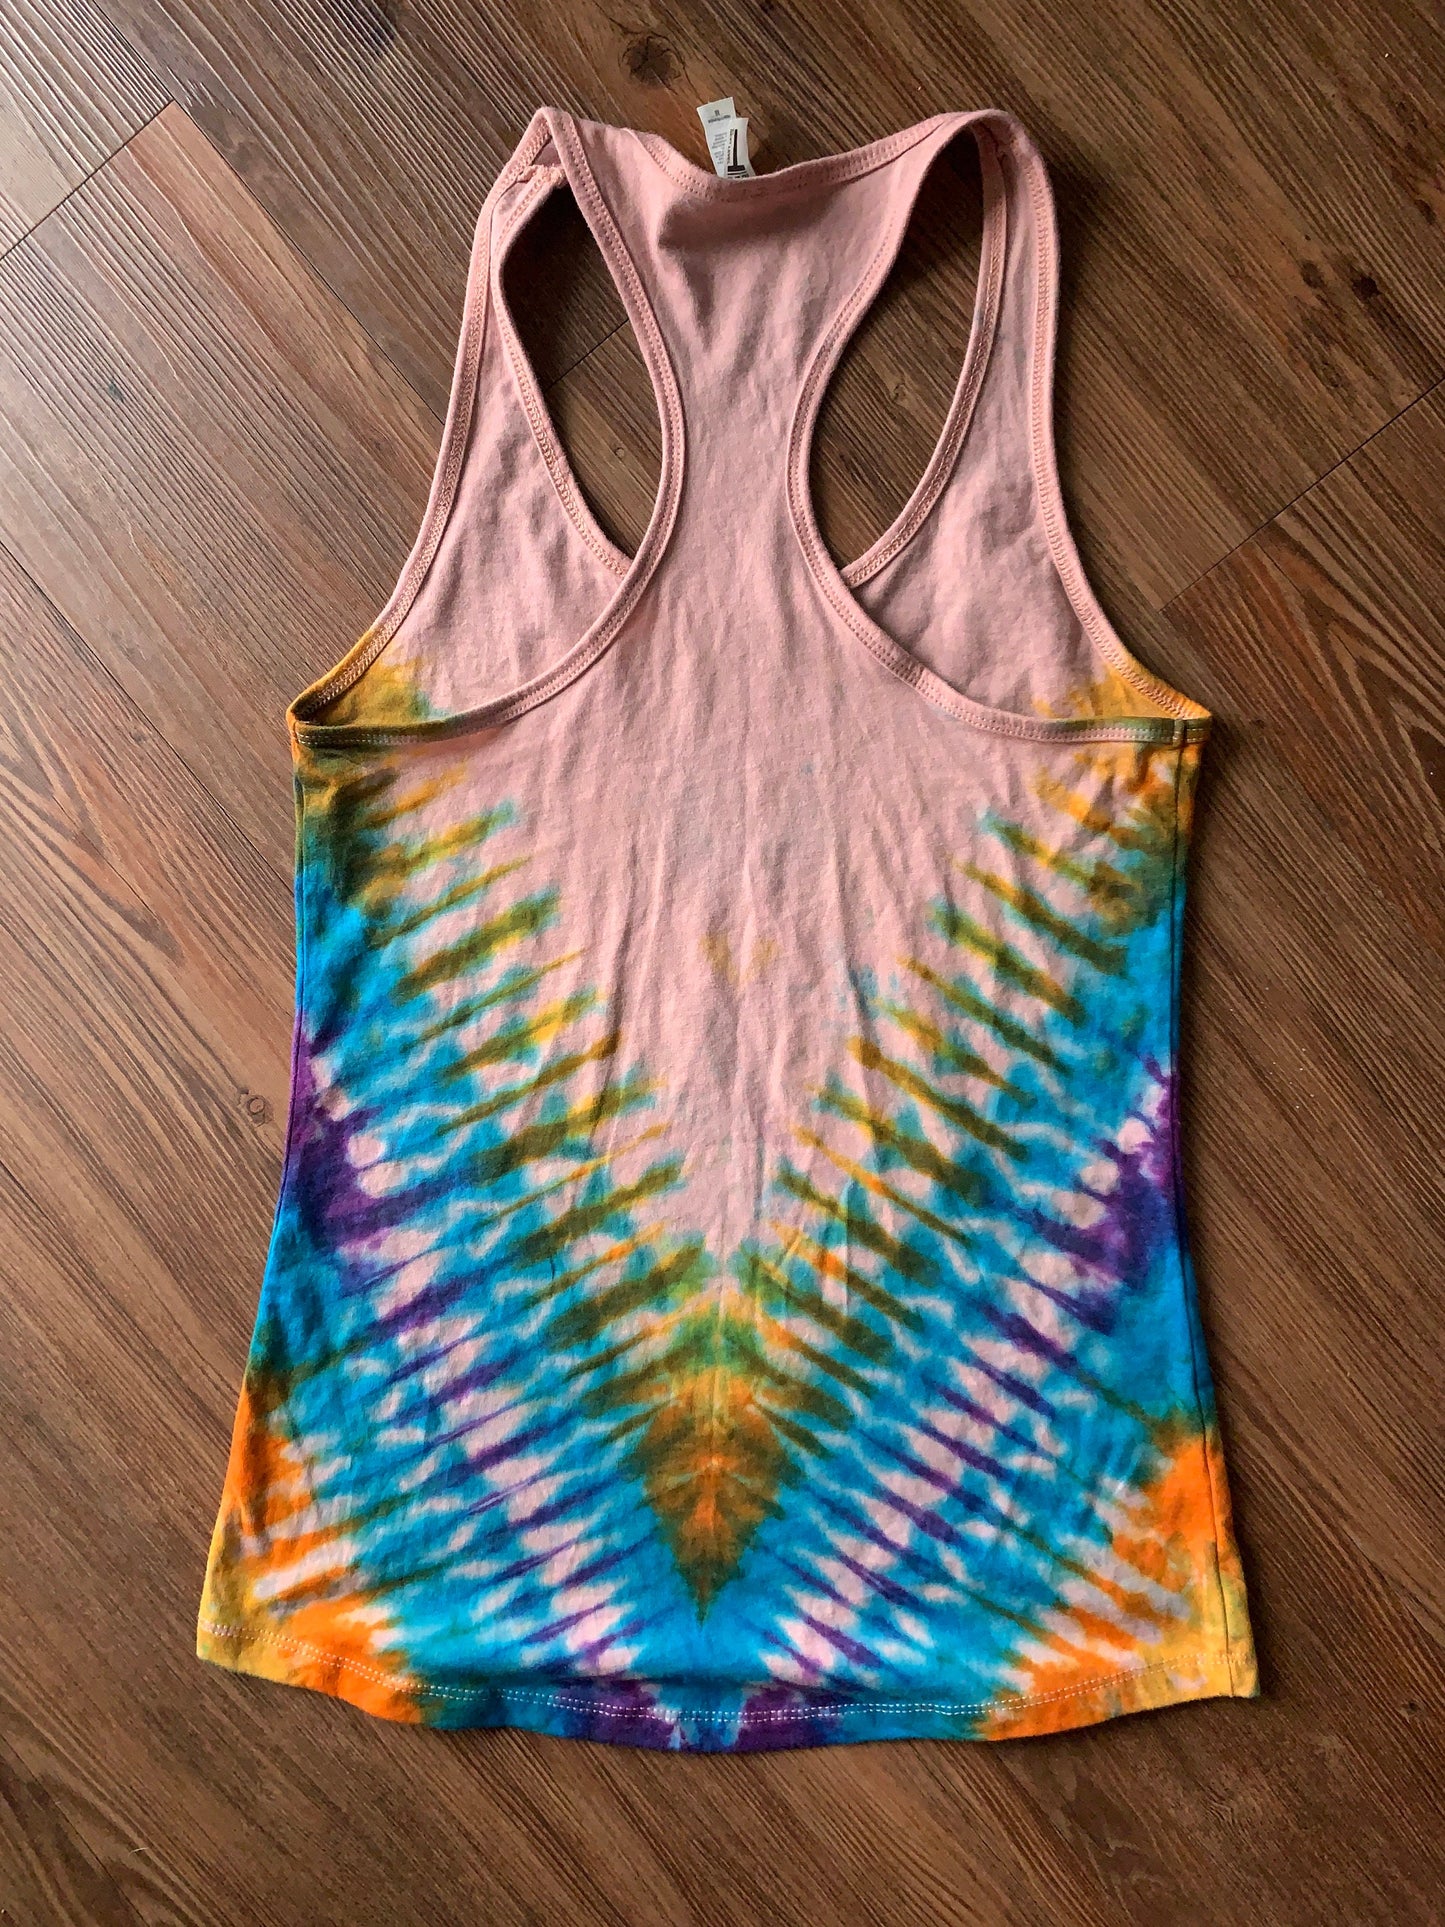 Boo-Bees Tie Dye Tank Top | Pastel Tie Dye Sleeveless Top | Women's Size Medium Racerback | Upcycled & Tie Dyed by Hand